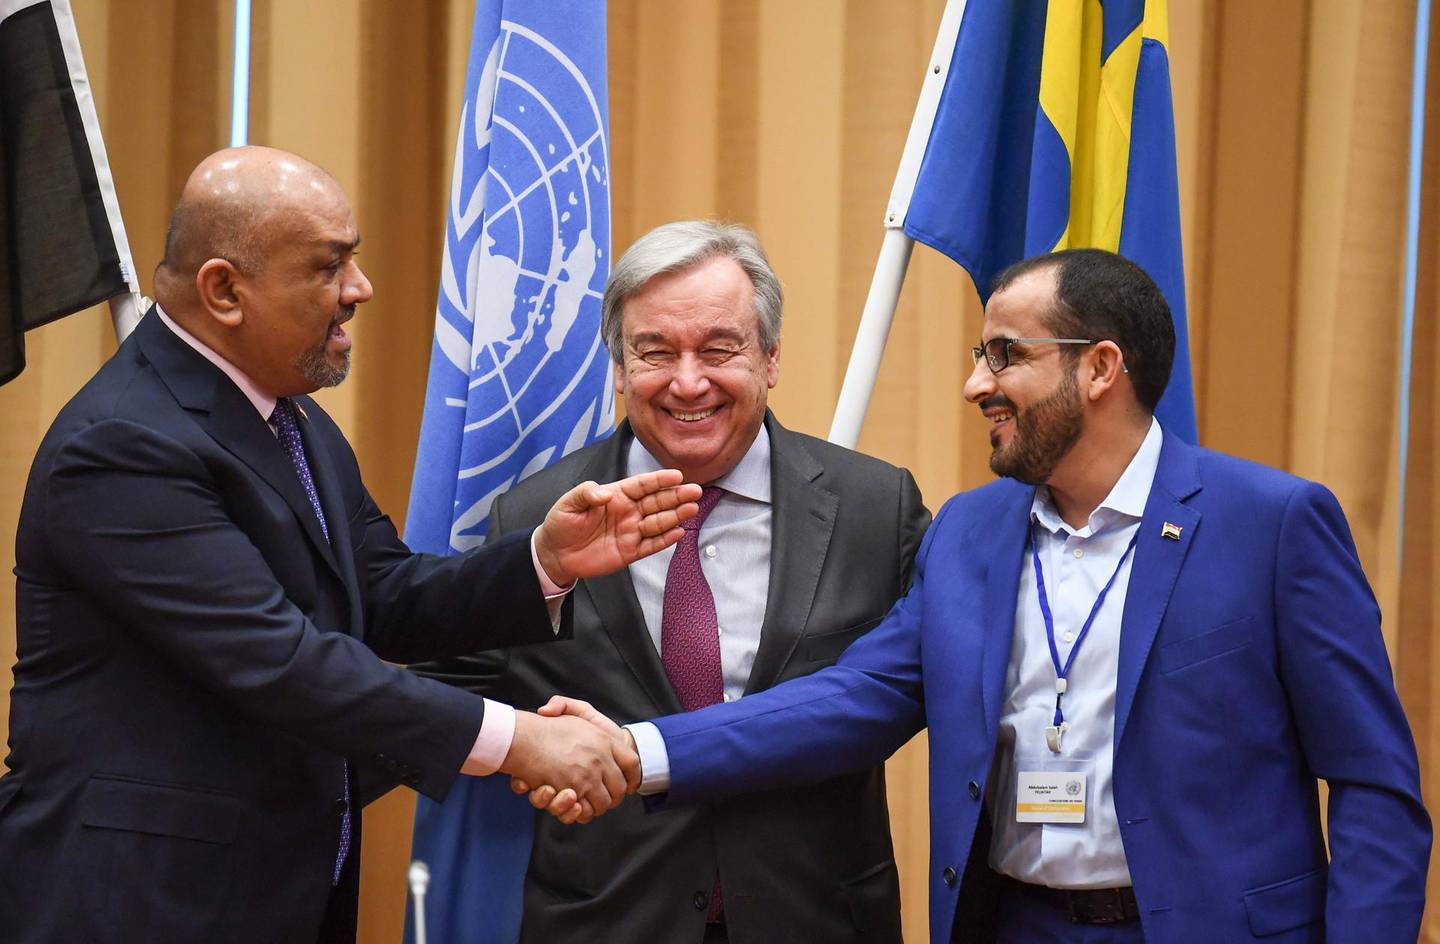 Yemen's foreign minister Khaled al-Yamani (L) and the head orebel negotiator Mohammed Abdelsalam (R) shake hands under the eyes of United Nations Secretary General Antonio Guterres (C), during peace consultations taking place at Johannesberg Castle in Rimbo, north of Stockholm, Sweden, on December 13, 2018. 
 Yemen's government and rebels have agreed to a ceasefire in flashpoint Hodeida, where the United Nations will now play a central role, the UN chief said.  / AFP / Jonathan NACKSTRAND
